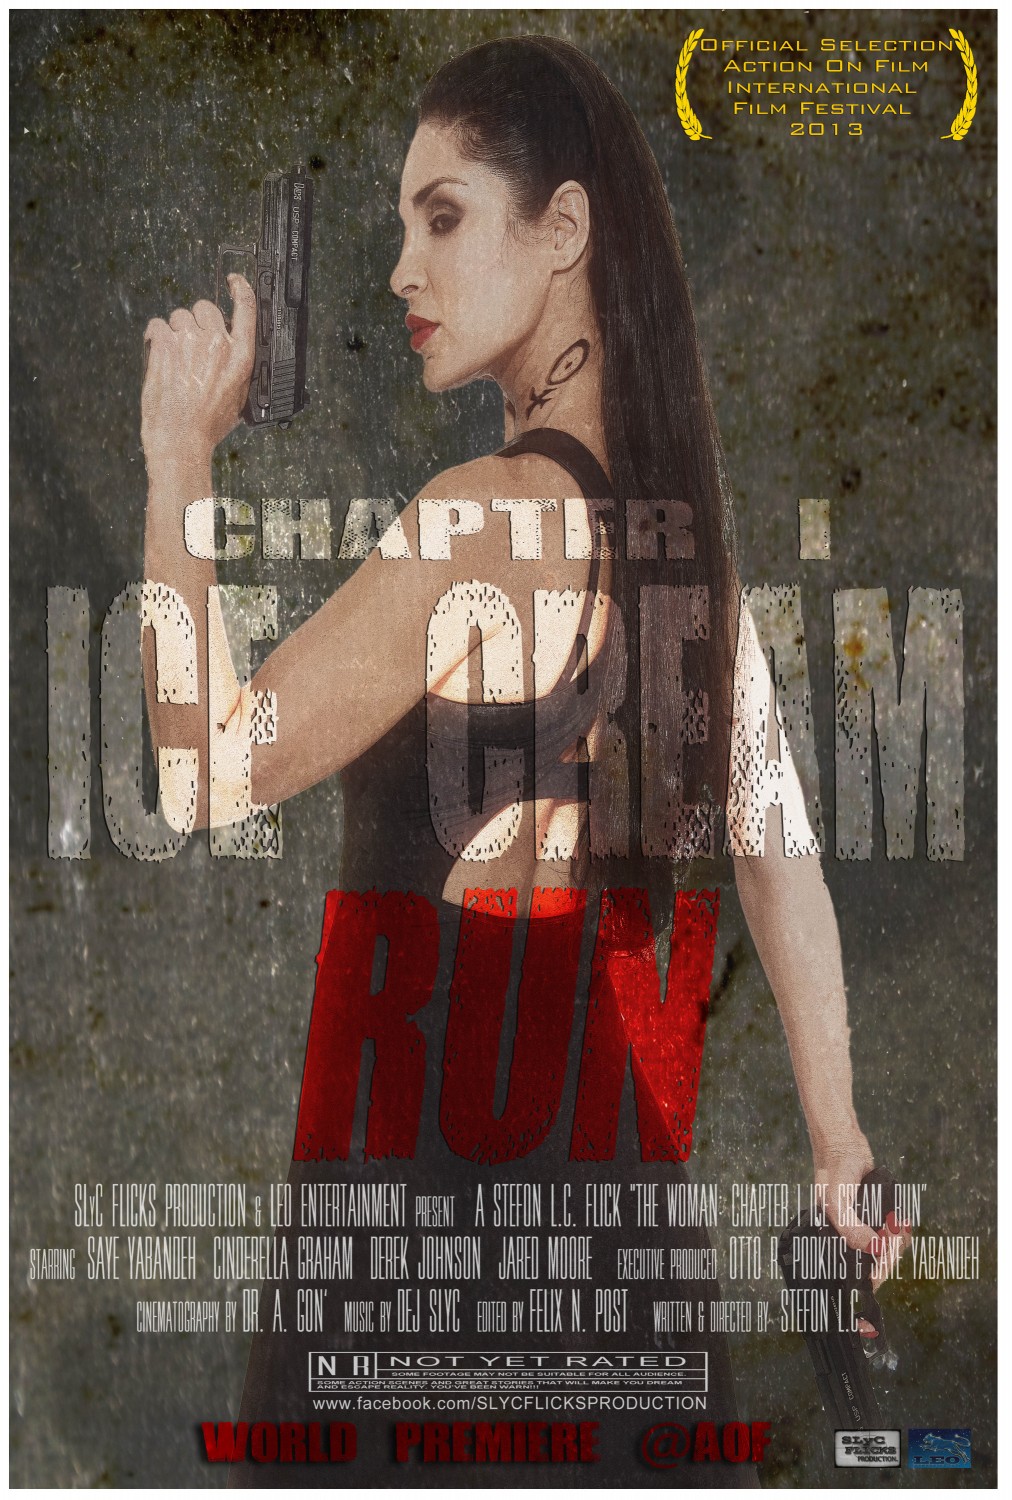 Extra Large Movie Poster Image for The Woman: Chapter One - Ice Cream, Run